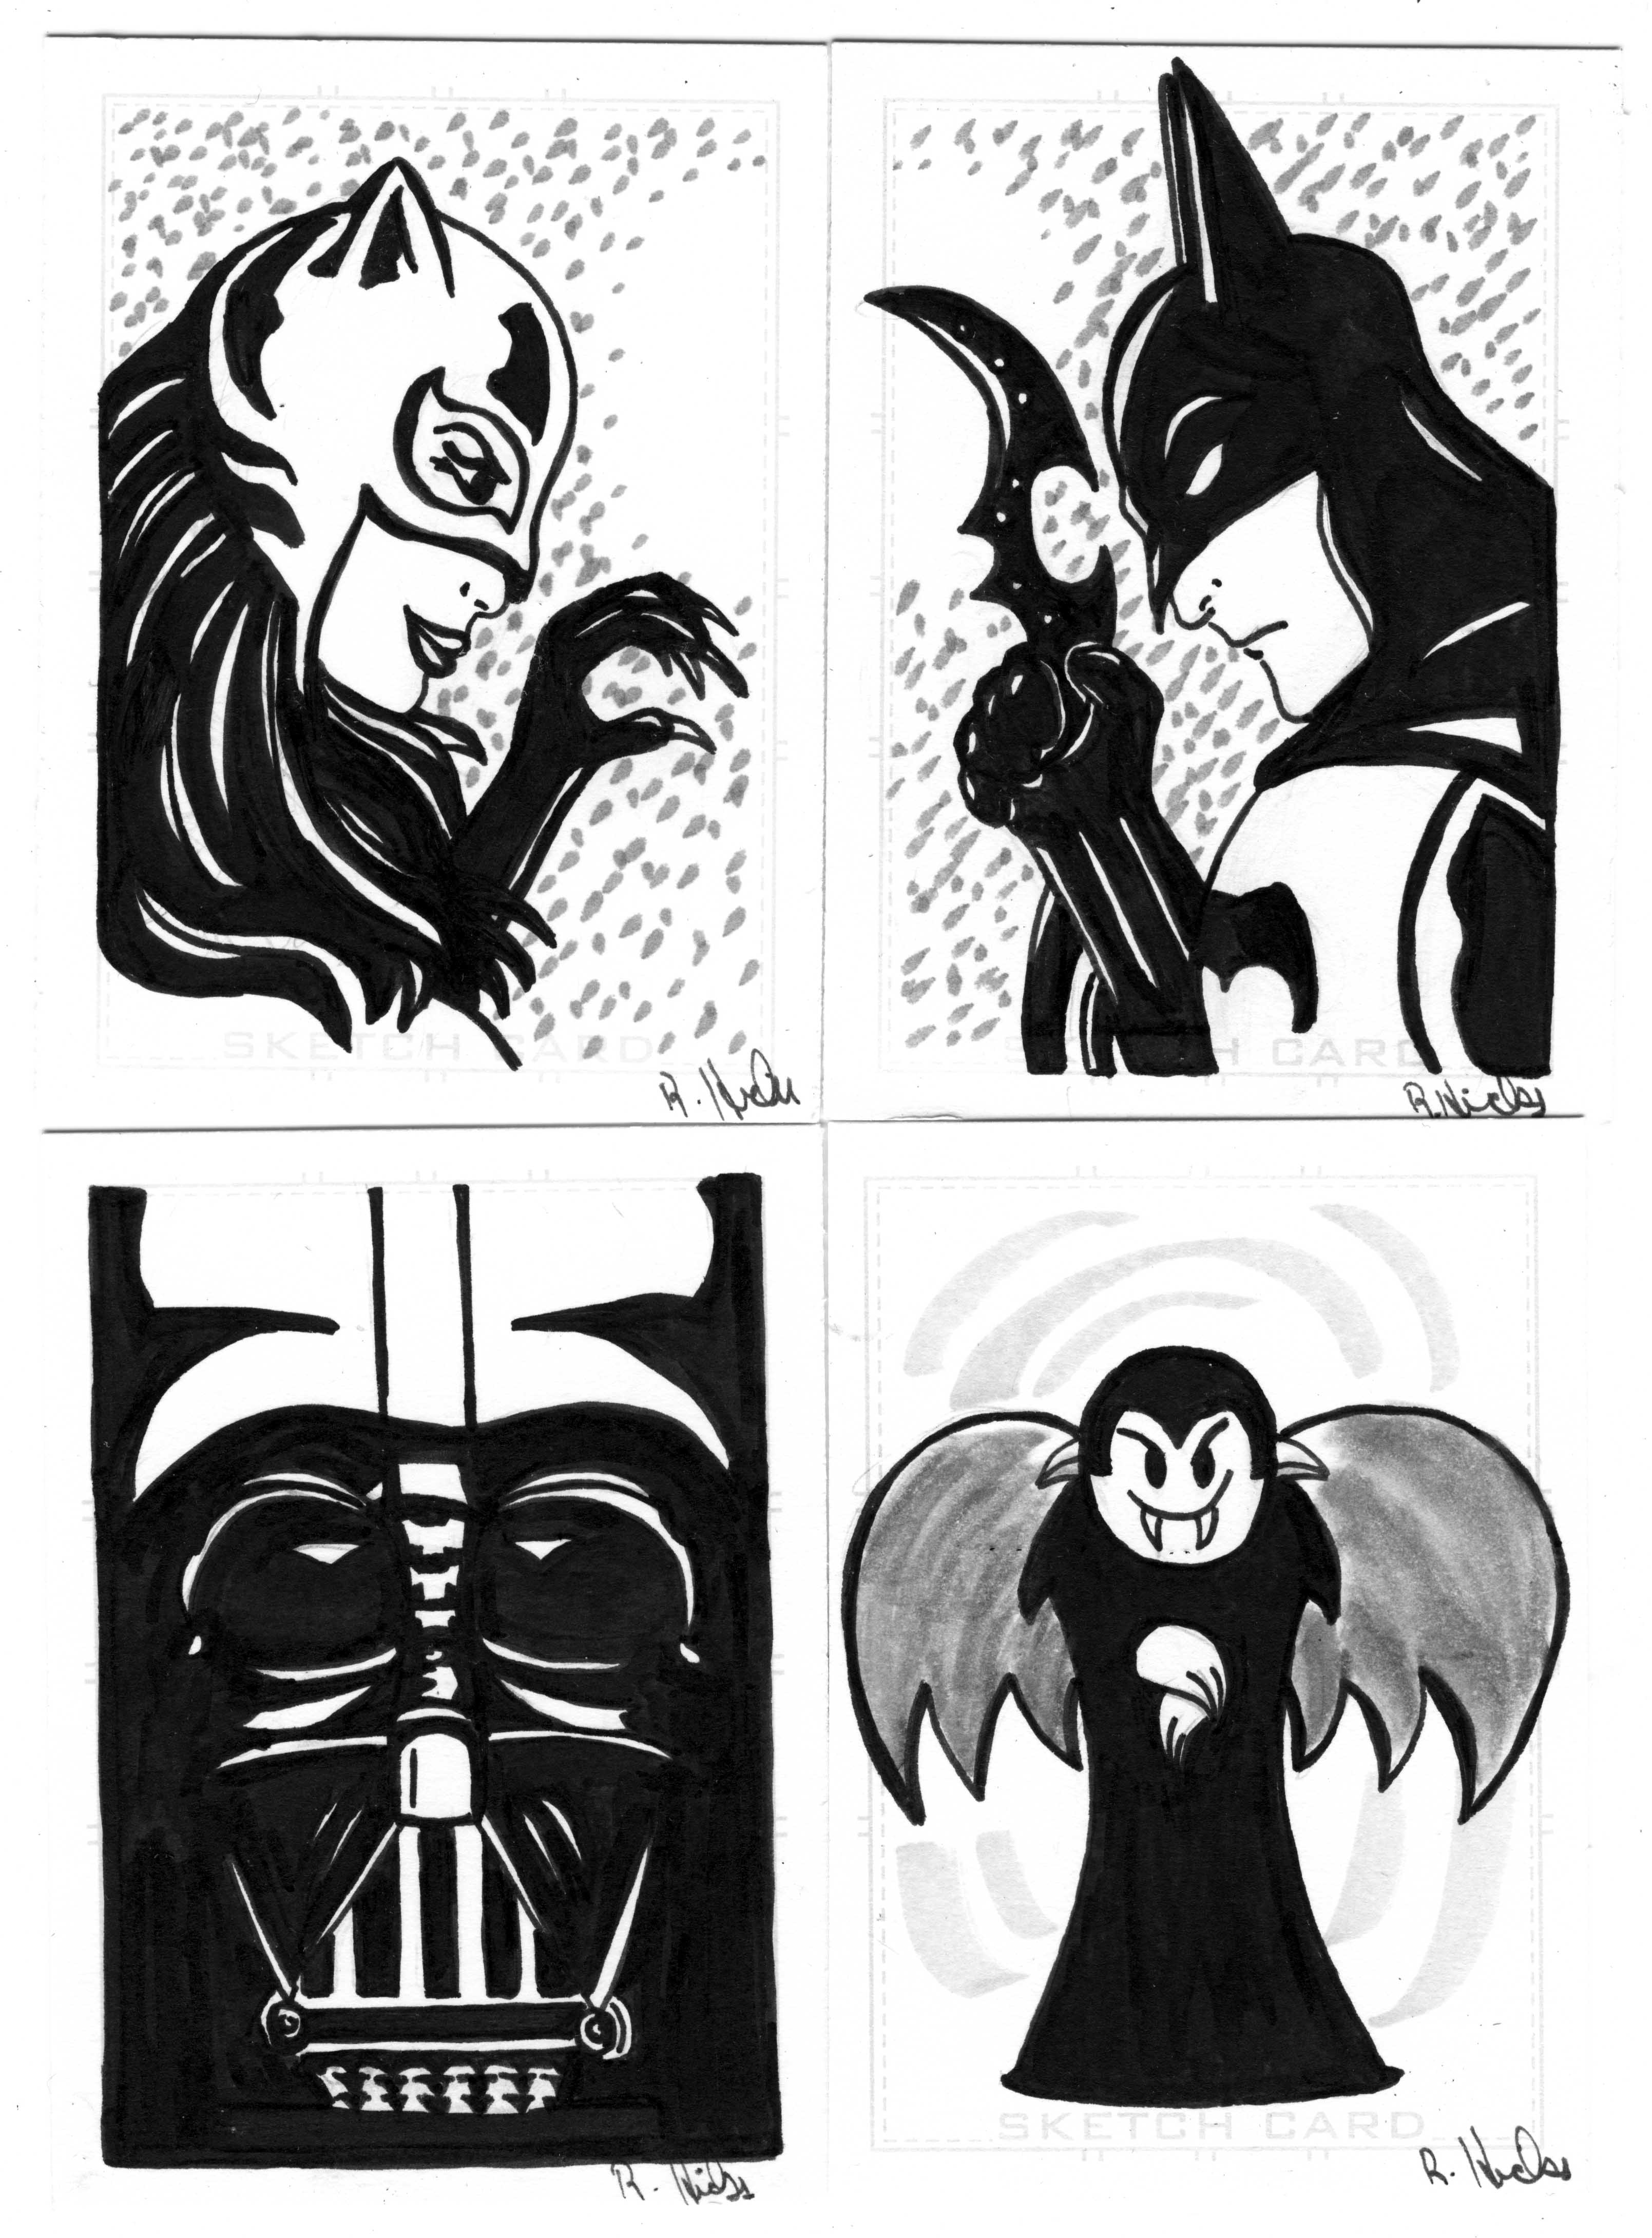 Four black and white sketch cards featuring, clockwise from top left, Catwoman, Batman, a Little Vampire, and Darth Vader. Art by Rebecca Hicks.